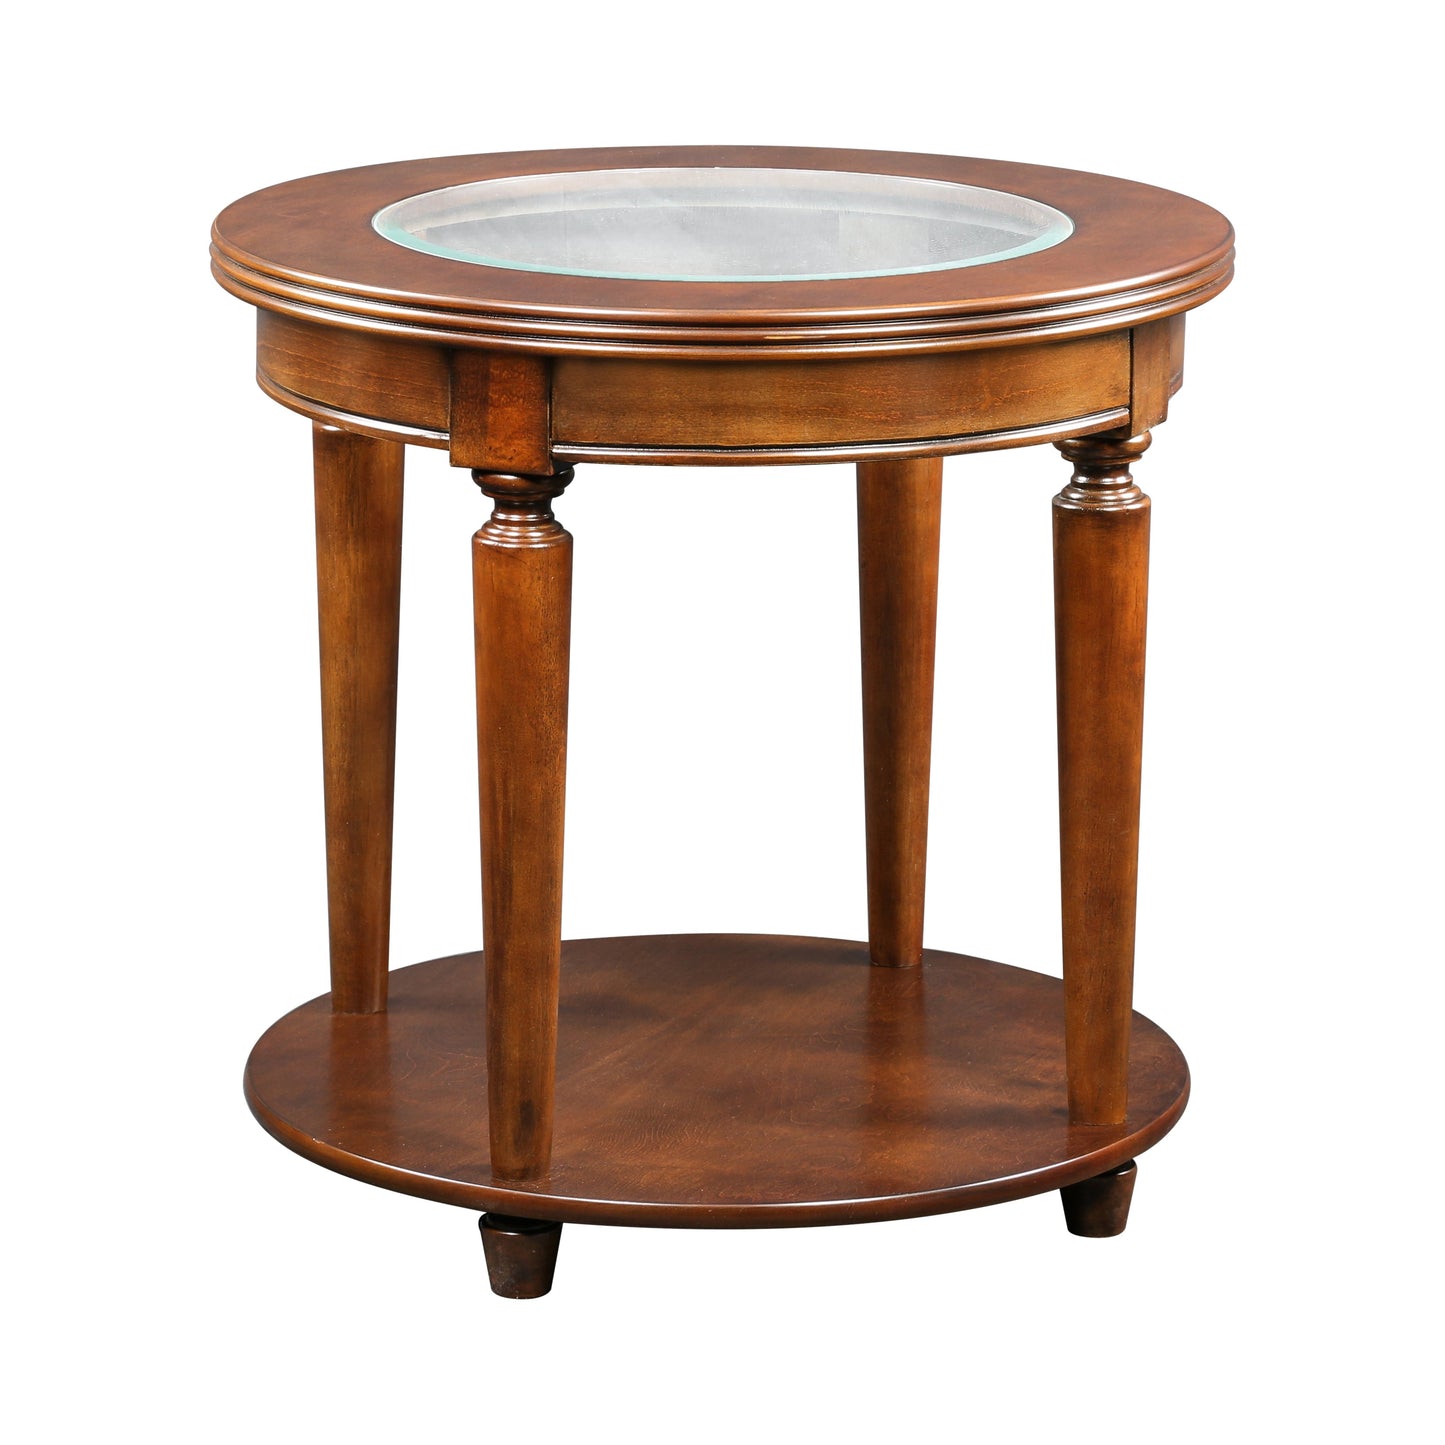 Canello Transitional Open Shelf End Table